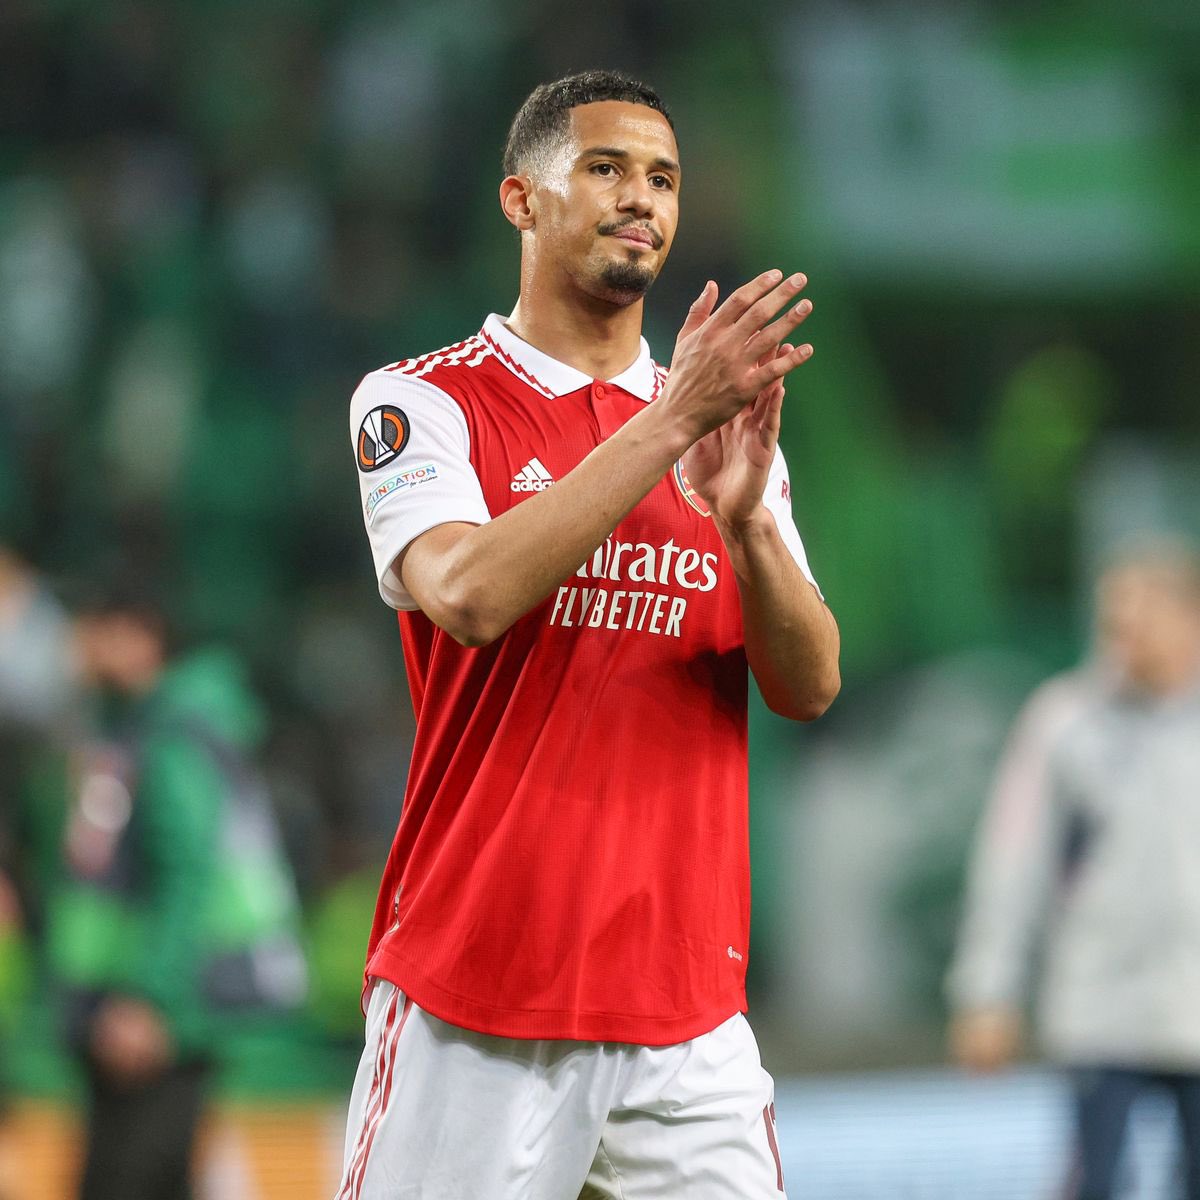 🎙️| @Olly_A_informer 

🗣️From my understanding Arsenal has offered William Saliba around £120,000 p/w contract. Lots of talk about Arsenal having to sell Saliba to PSG are completely FALSE. 

🗣️Bearing in mind Arsenal offered a ‘rotation player’ Eddie Nketiah £100,000 p/w I am…